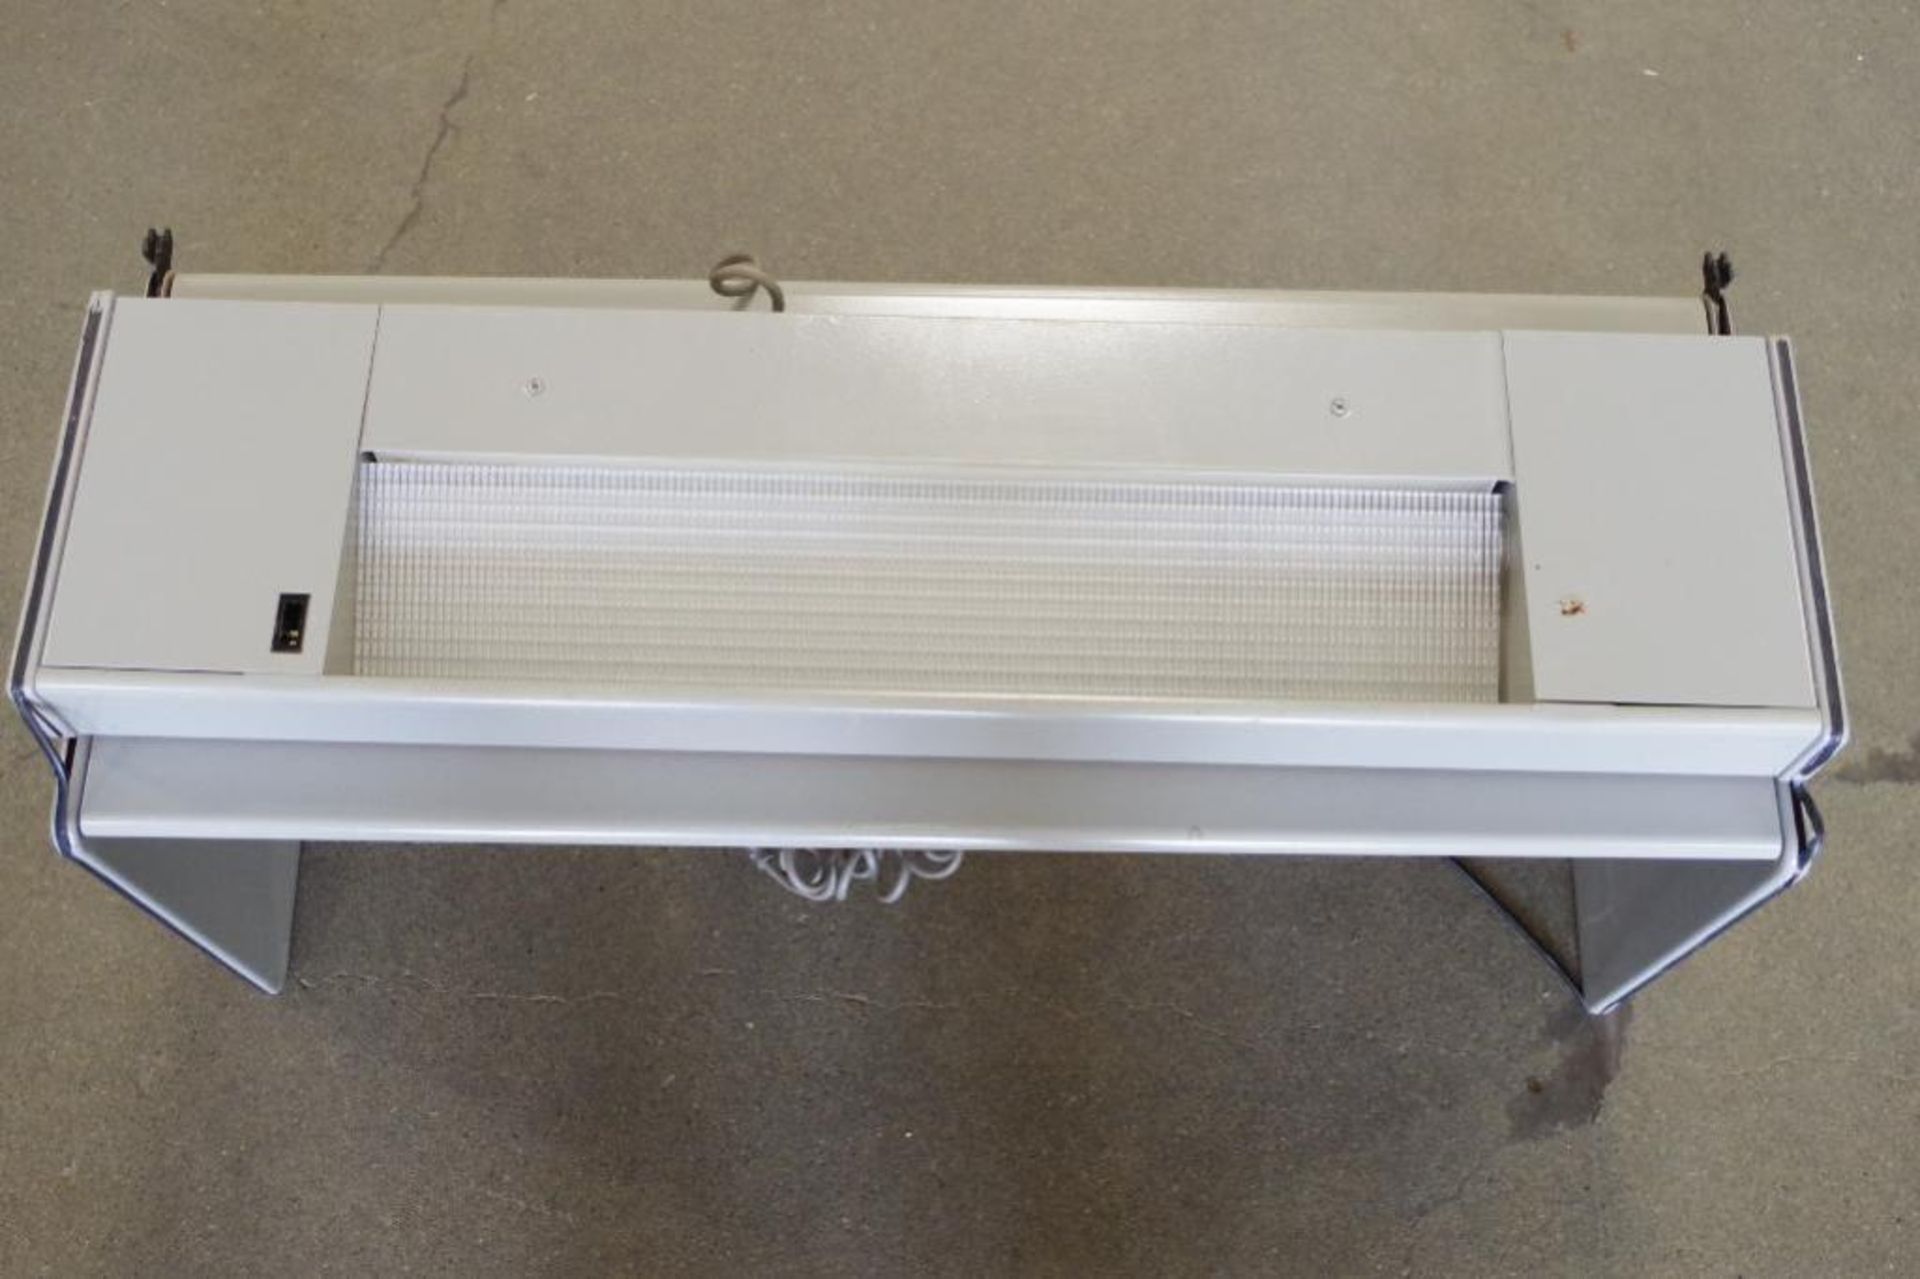 Fluorescent Light Fixture Approx. 36"L x 14"D x 17"H (Condition Unknown) - Image 3 of 4